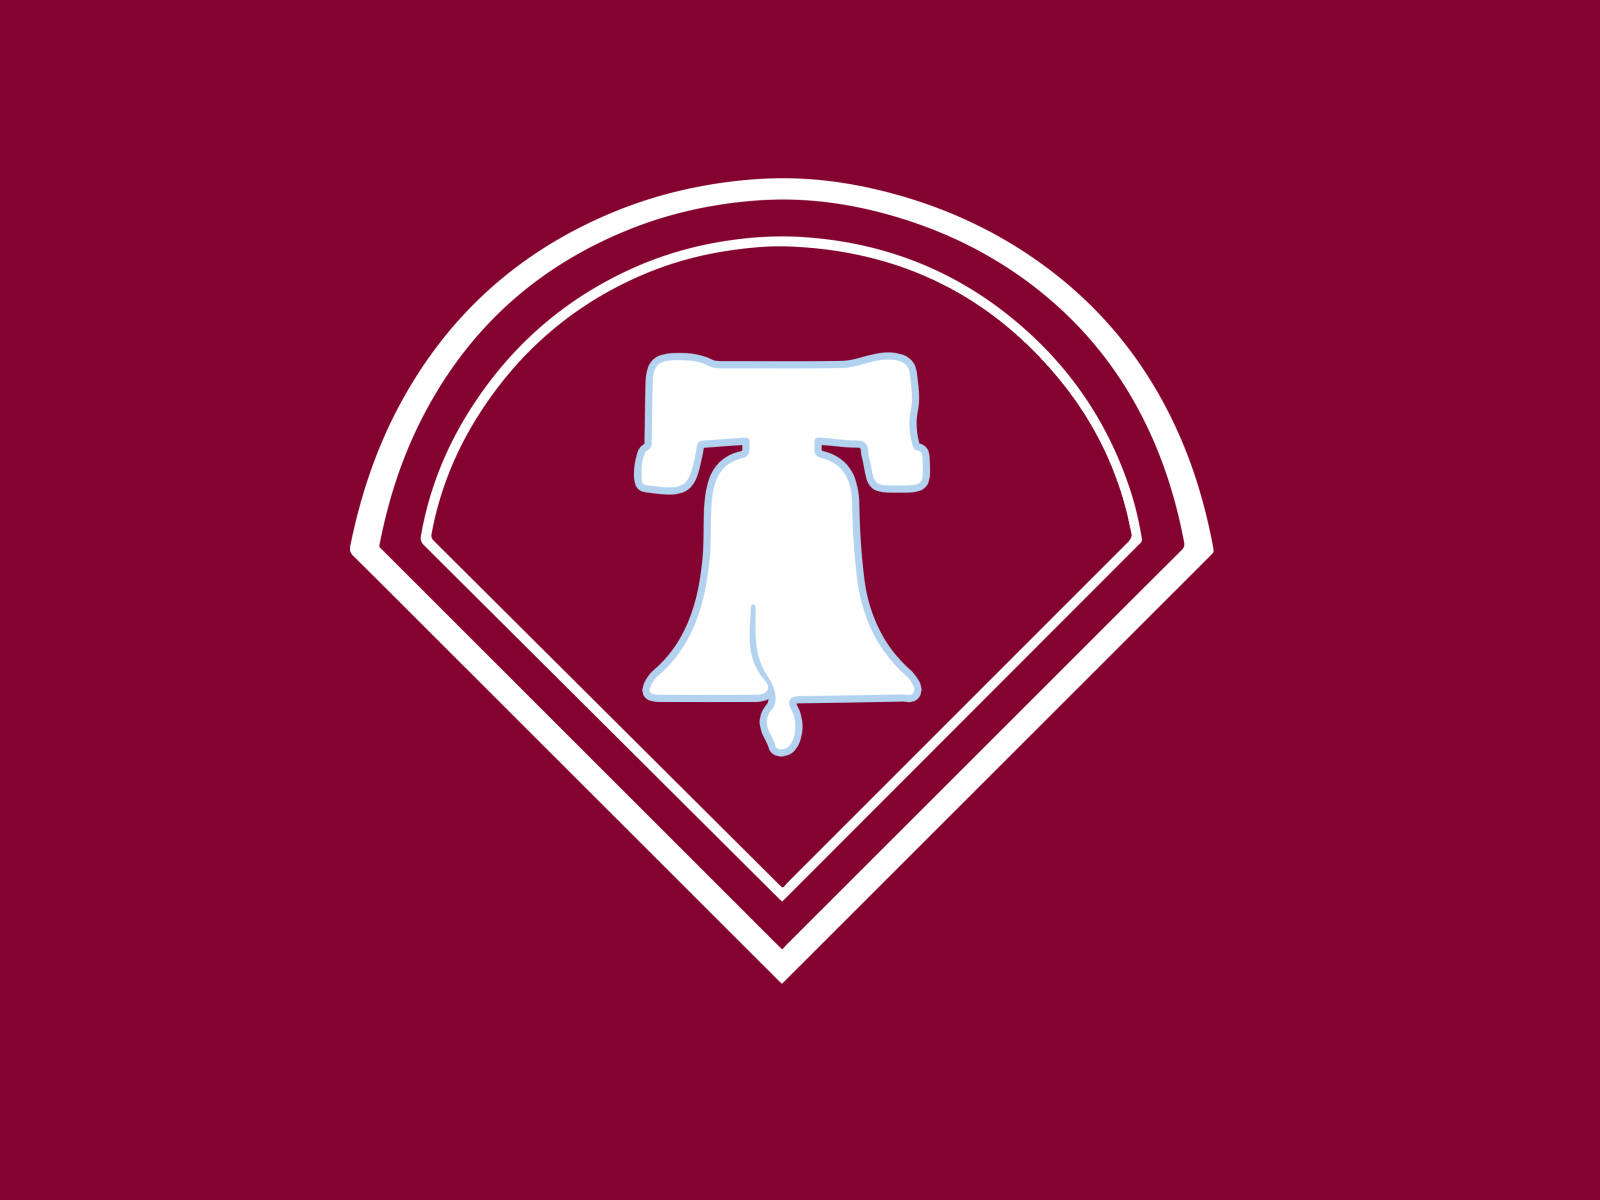 Ring The Bell - Phillies Minimalist Logo by Chris Rosenberry on